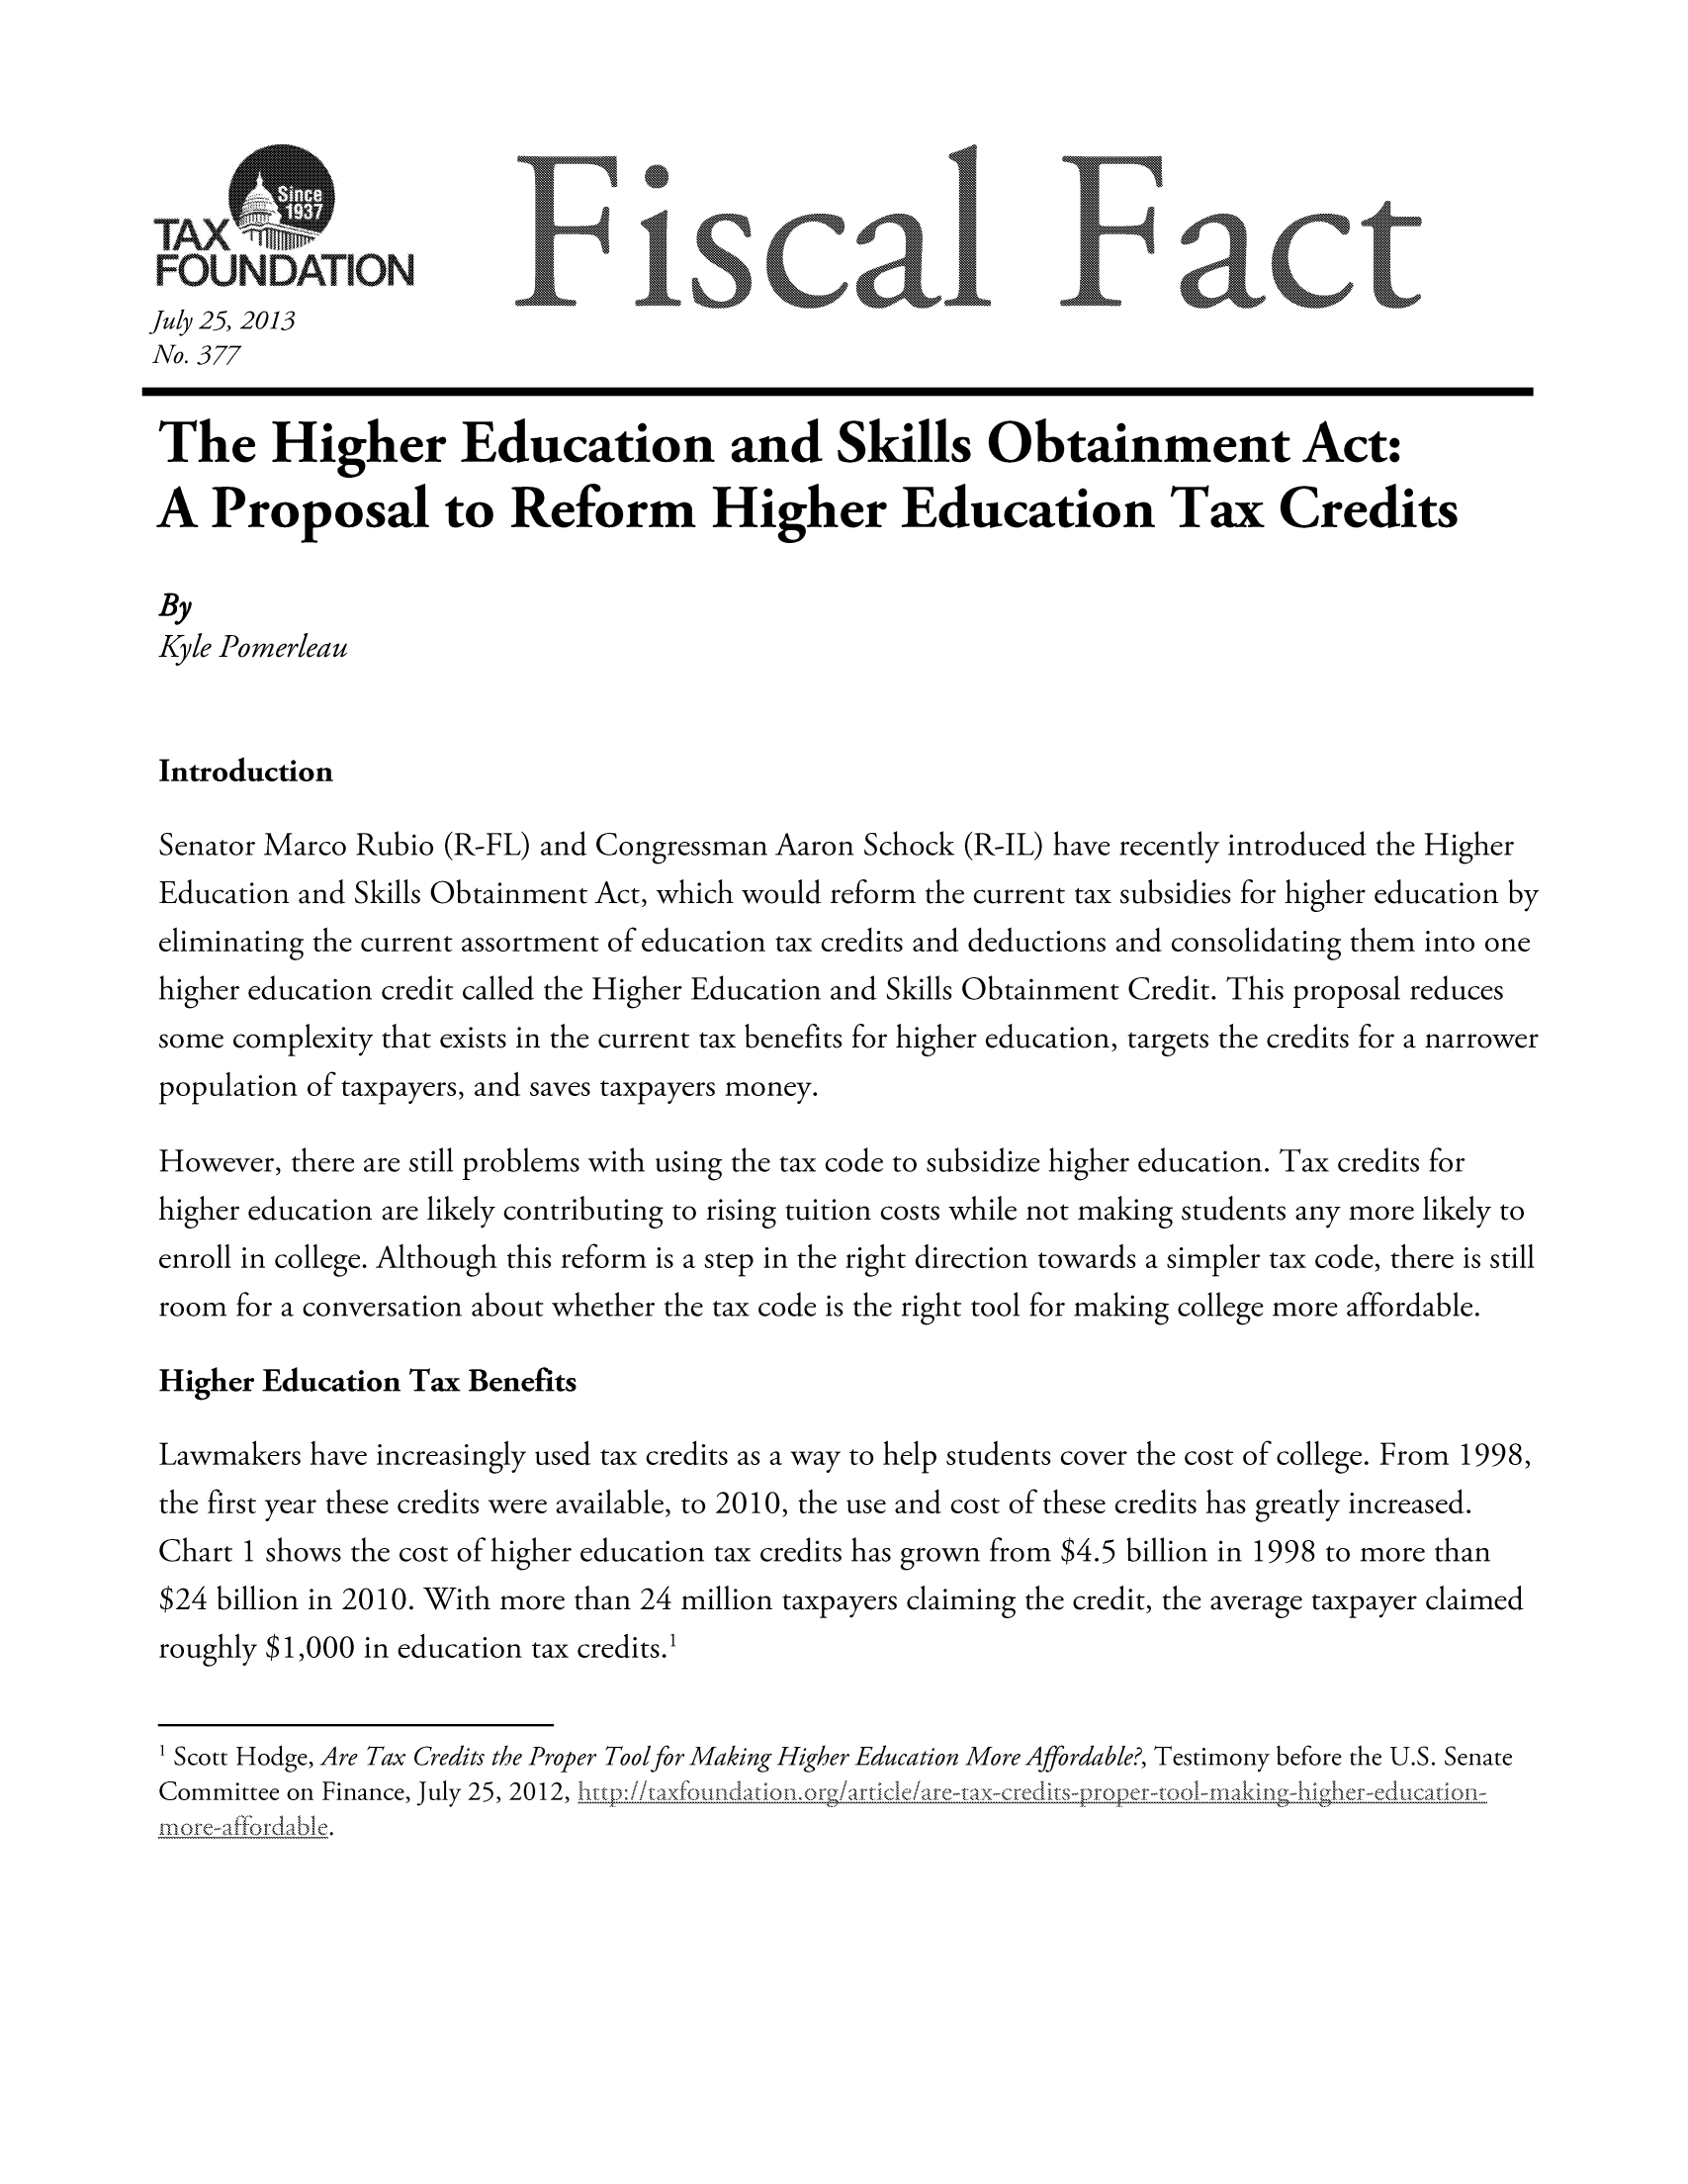 handle is hein.taxfoundation/ffdhhxz0001 and id is 1 raw text is: July 25, 2013
No. 377
The Higher Education and Skills Obtainment Act:
A Proposal to Reform Higher Education Tax Credits
By
Kyle Pomerleau
Introduction
Senator Marco Rubio (R-FL) and Congressman Aaron Schock (R-JL) have recently introduced the Higher
Education and Skills Obtainment Act, which would reform the current tax subsidies for higher education by
eliminating the current assortment of education tax credits and deductions and consolidating them into one
higher education credit called the Higher Education and Skills Obtainment Credit. This proposal reduces
some complexity that exists in the current tax benefits for higher education, targets the credits for a narrower
population of taxpayers, and saves taxpayers money.
However, there are still problems with using the tax code to subsidize higher education. Tax credits for
higher education are likely contributing to rising tuition costs while not making students any more likely to
enroll in college. Although this reform is a step in the right direction towards a simpler tax code, there is still
room for a conversation about whether the tax code is the right tool for making college more affordable.
Higher Education Tax Benefits
Lawmakers have increasingly used tax credits as a way to help students cover the cost of college. From 1998,
the first year these credits were available, to 2010, the use and cost of these credits has greatly increased.
Chart 1 shows the cost of higher education tax credits has grown from $4.5 billion in 1998 to more than
$24 billion in 2010. With more than 24 million taxpayers claiming the credit, the average taxpayer claimed
roughly $1,000 in education tax credits.1
1 Scott Hodge, Are Tax Credits the Proper Tool for Making Higher Education More Affordable?, Testimony before the U.S. Senate
Committee on Finance, July 25, 2012,    °°


